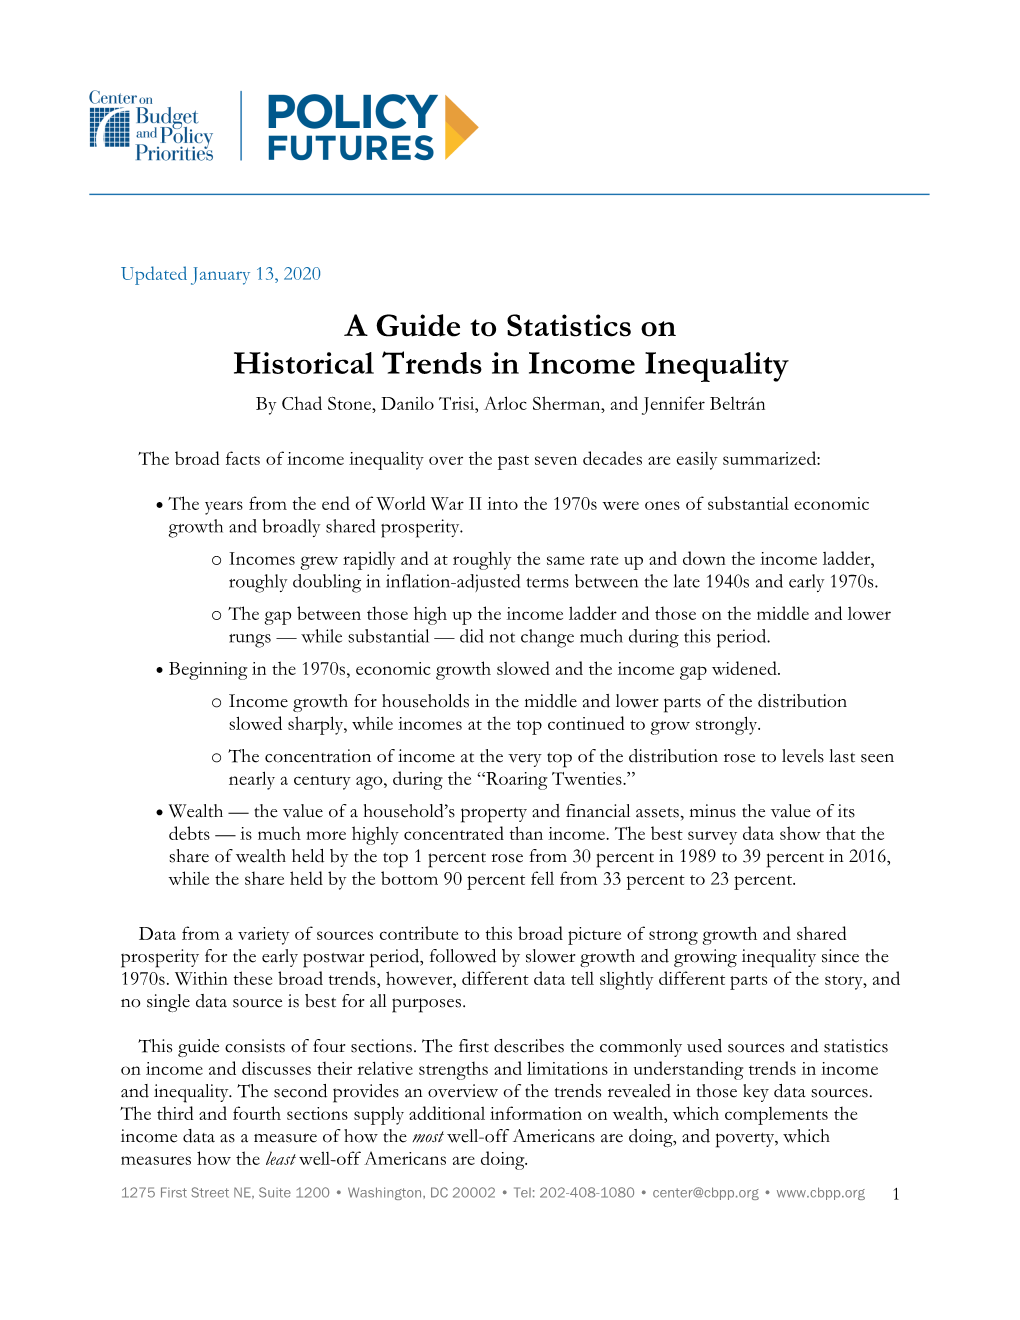 A Guide to Statistics on Historical Trends in Income Inequality by Chad Stone, Danilo Trisi, Arloc Sherman, and Jennifer Beltrán